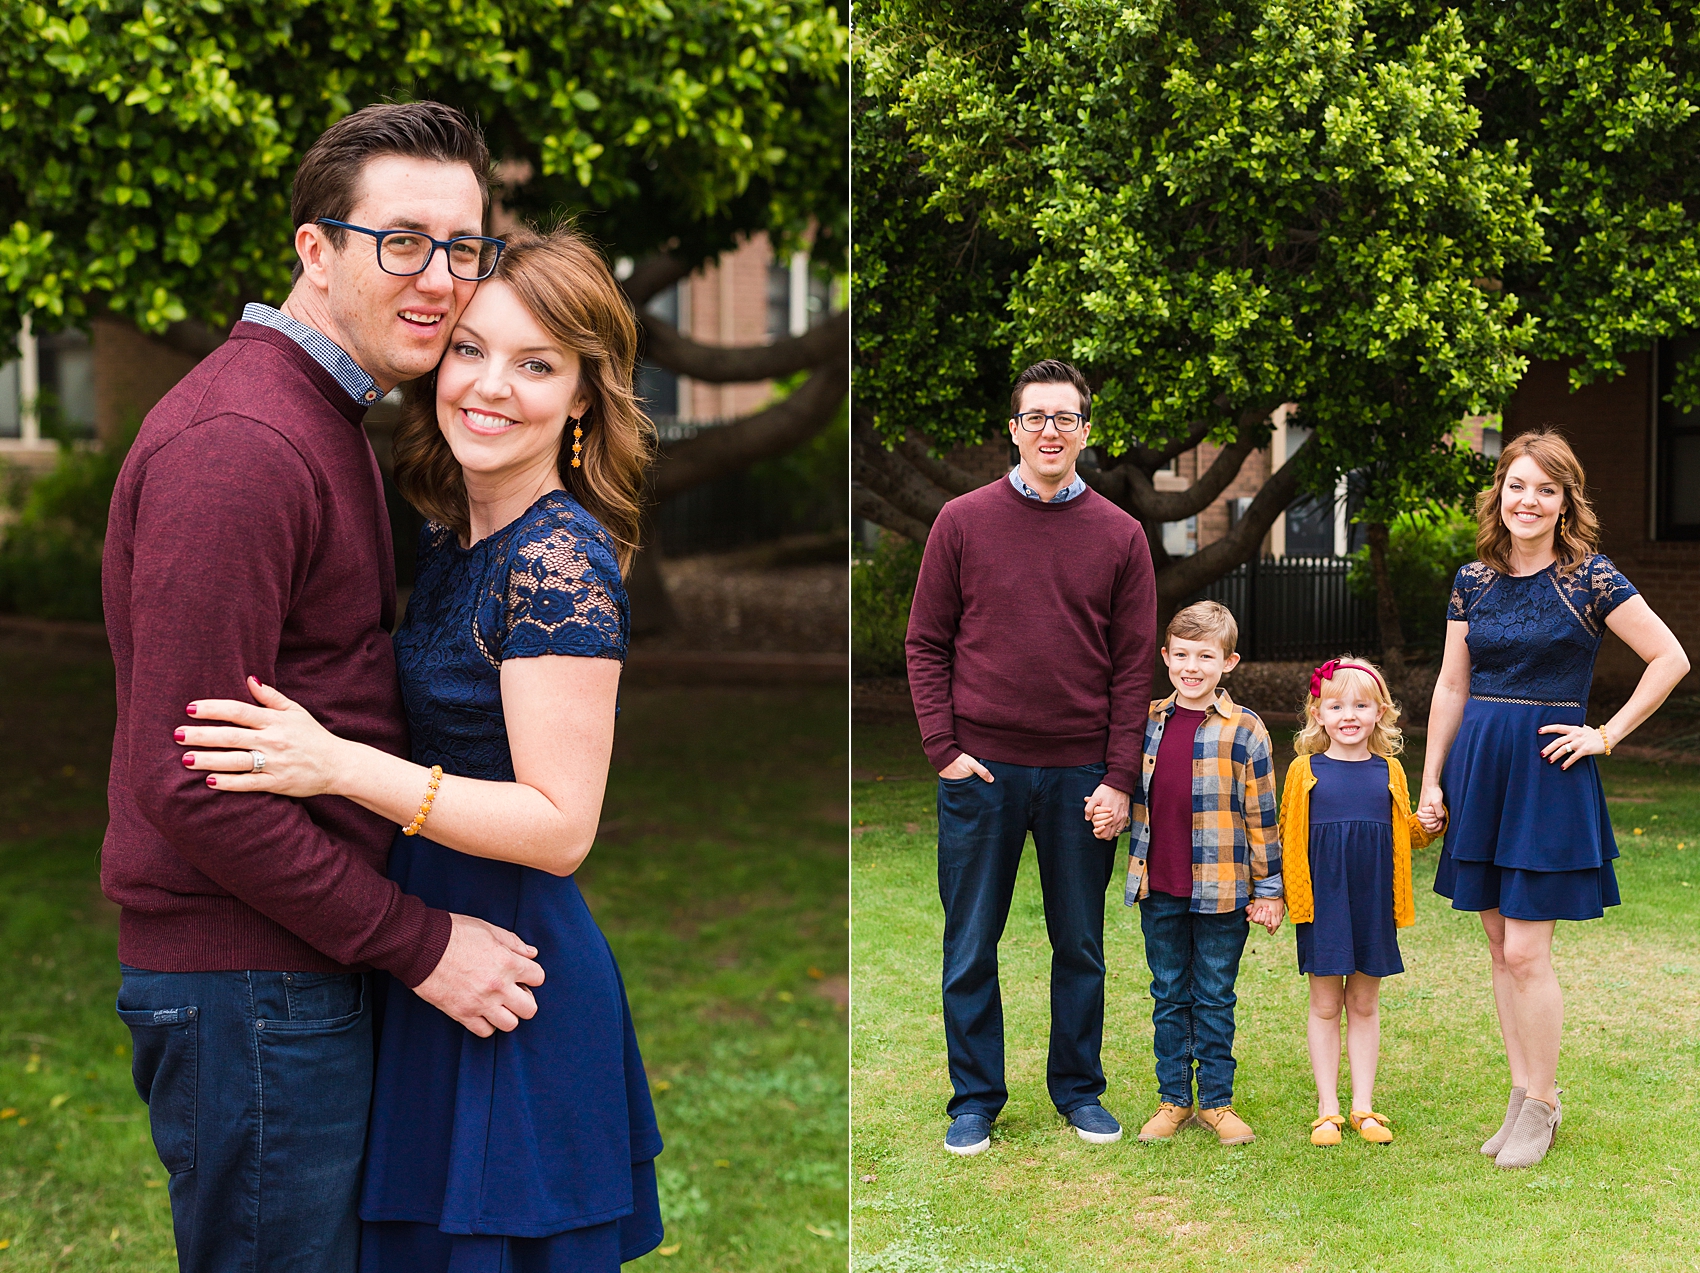 Leah Hope Photography | Scottsdale Phoenix Arizona | Downtown Phoenix Heritage Square | Family Pictures | What to Wear | Family Photos Poses